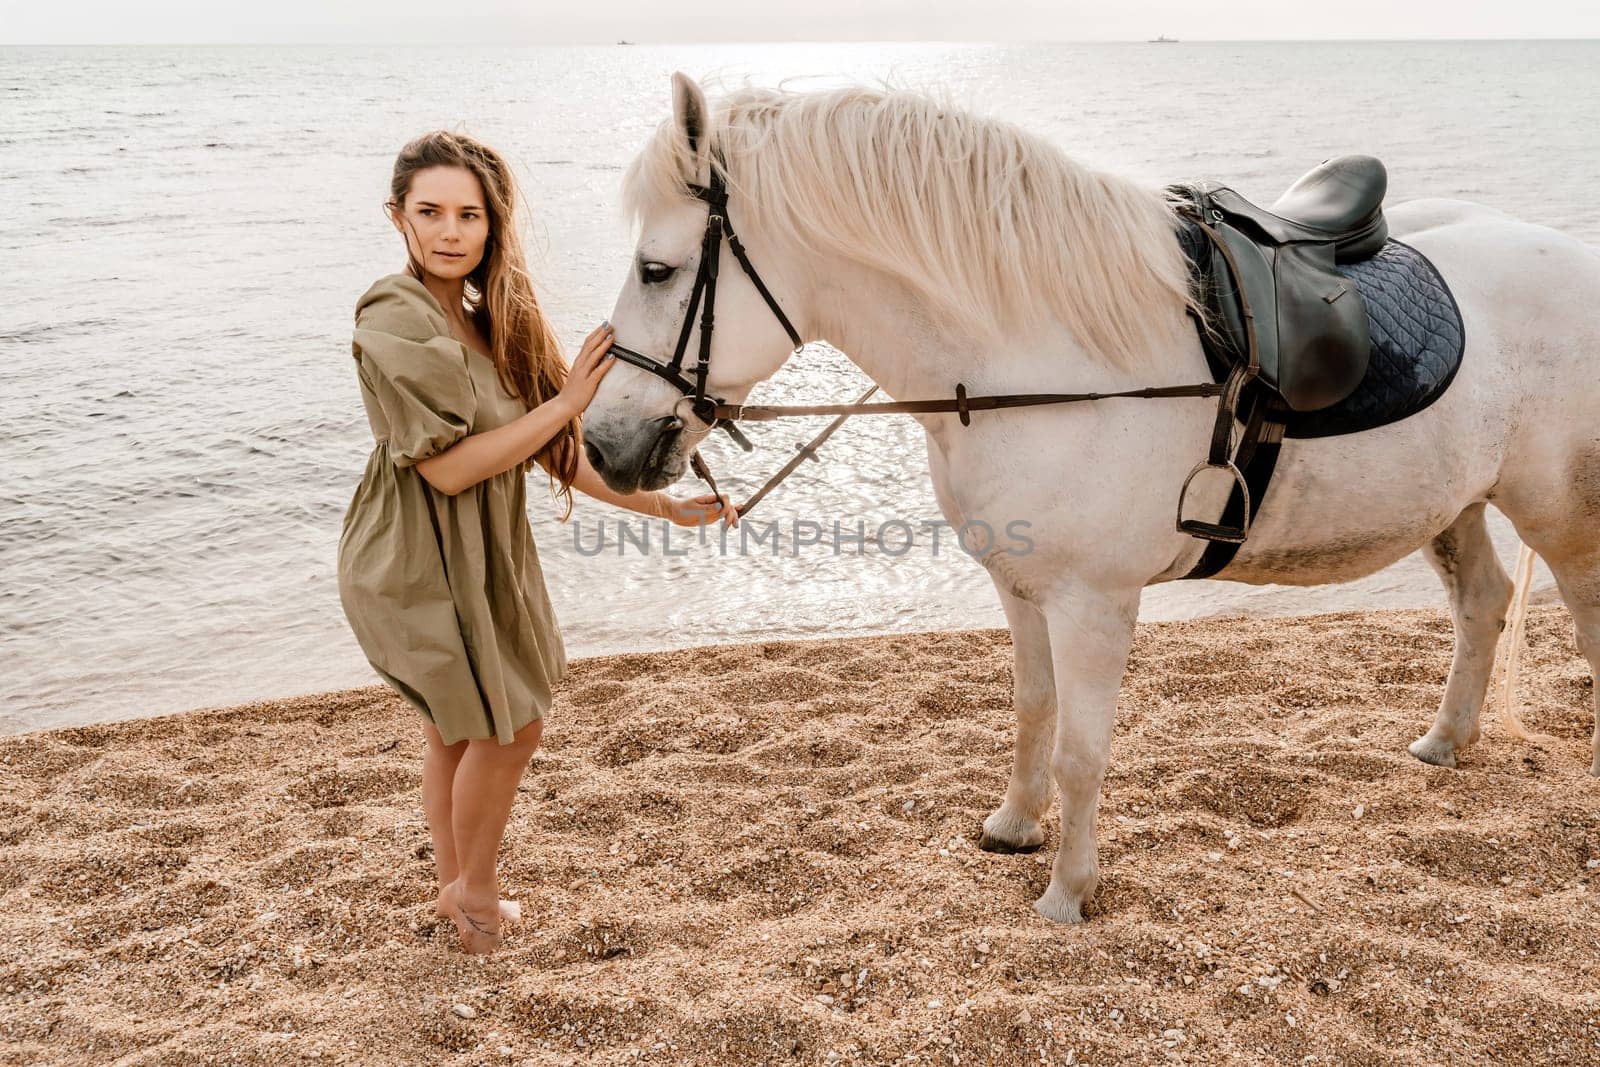 A white horse and a woman in a dress stand on a beach, with the sky and sea creating a picturesque backdrop for the scene. by Matiunina